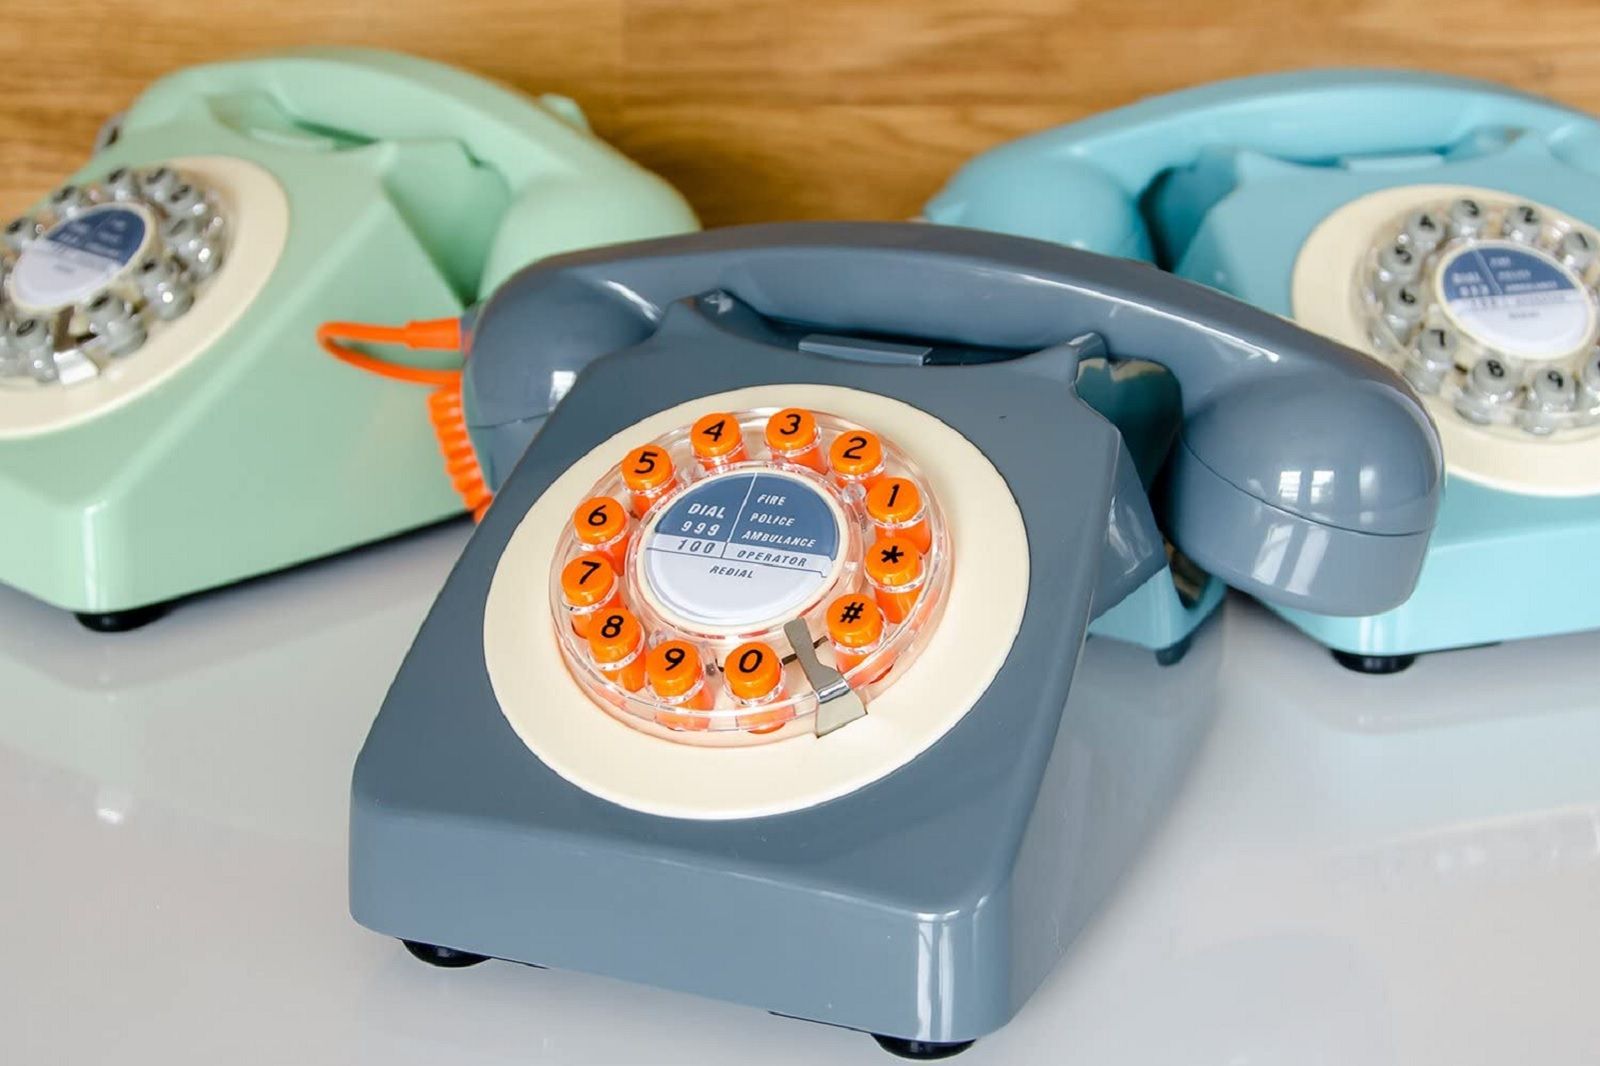 Amazing Retro Gadgets You Can Buy That Will Remind You Of The Glory Days photo 3